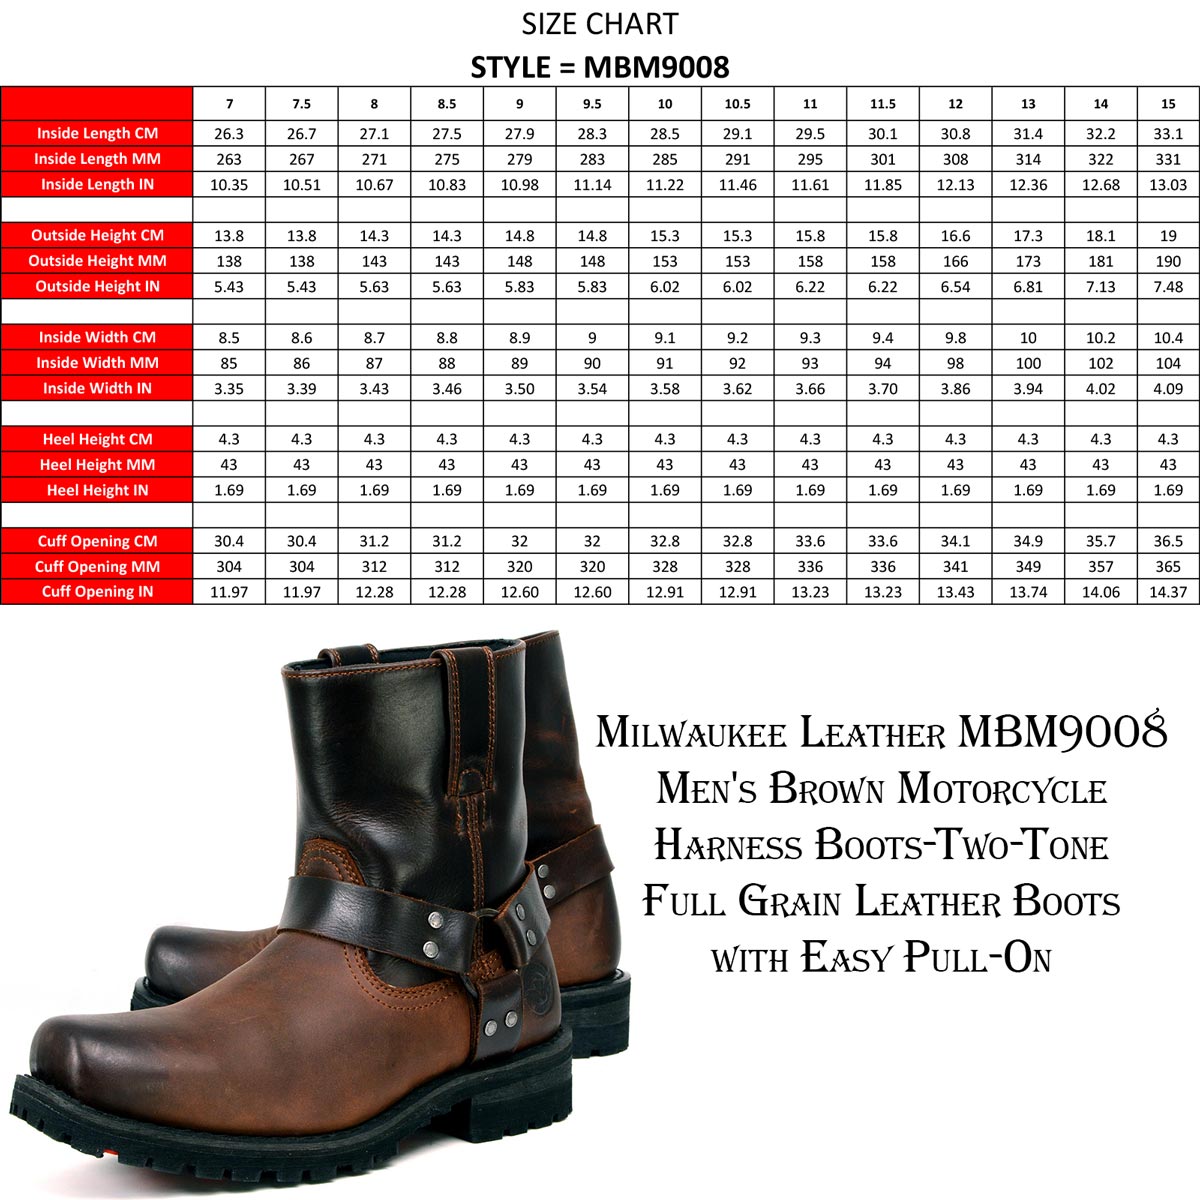 Milwaukee Leather MBM9008 Men's Brown Motorcycle Harness Boots-Two-Tone Full Grain Leather Boots with Easy Pull-On